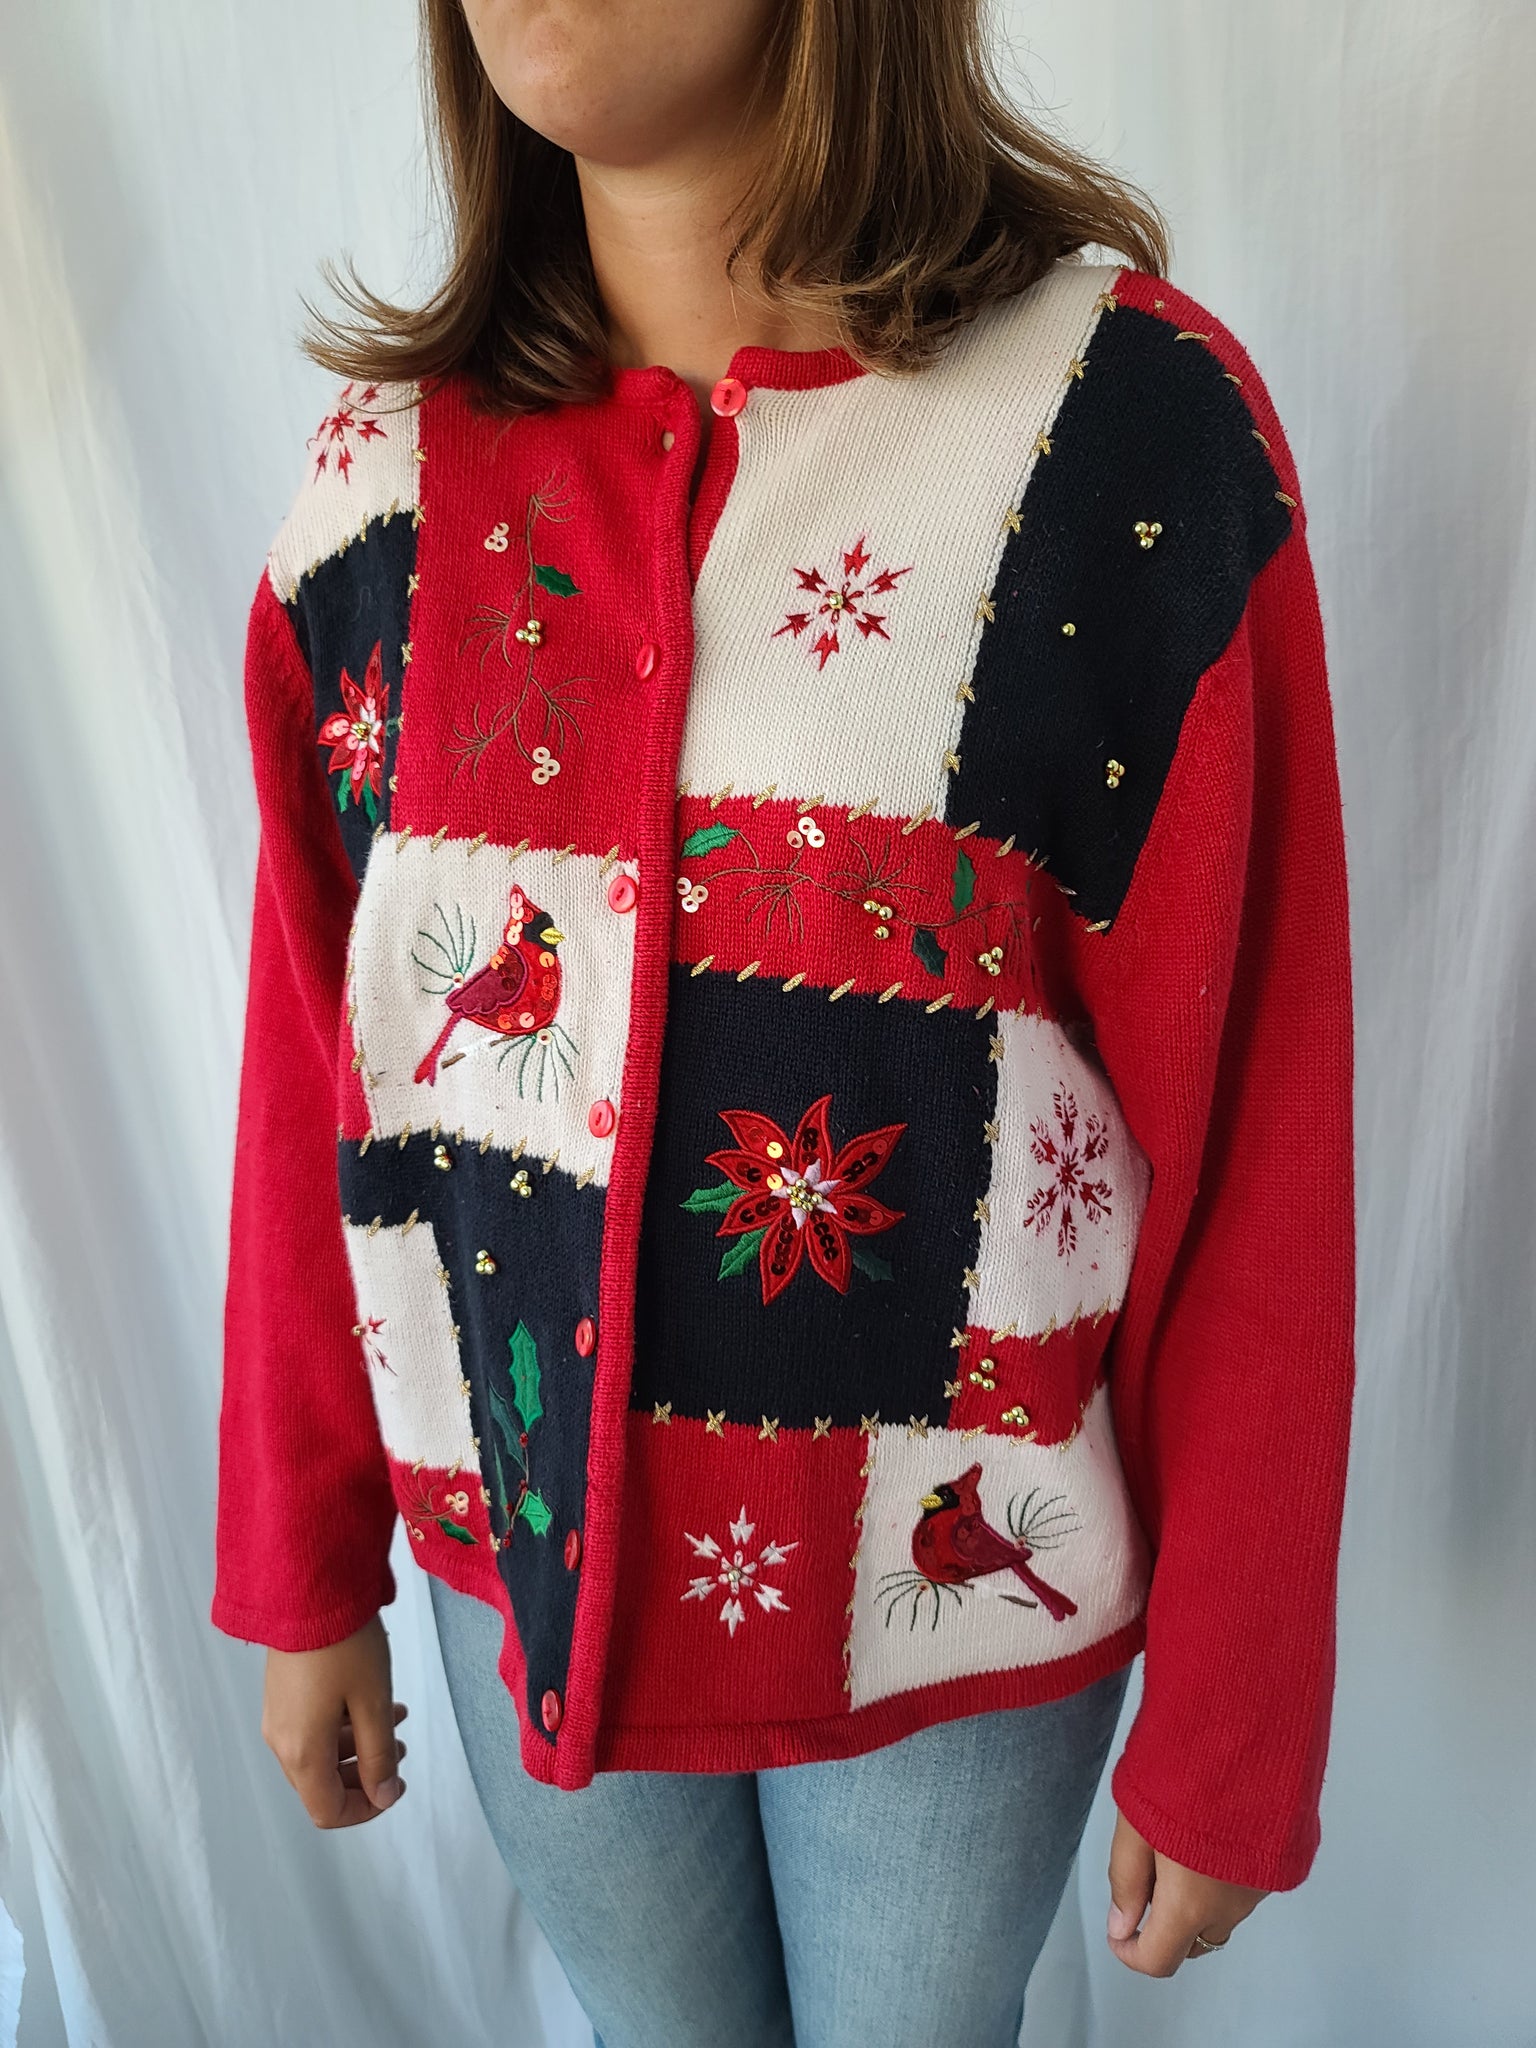 Cardinals and Poinsettia Checkered Button Christmas Sweater